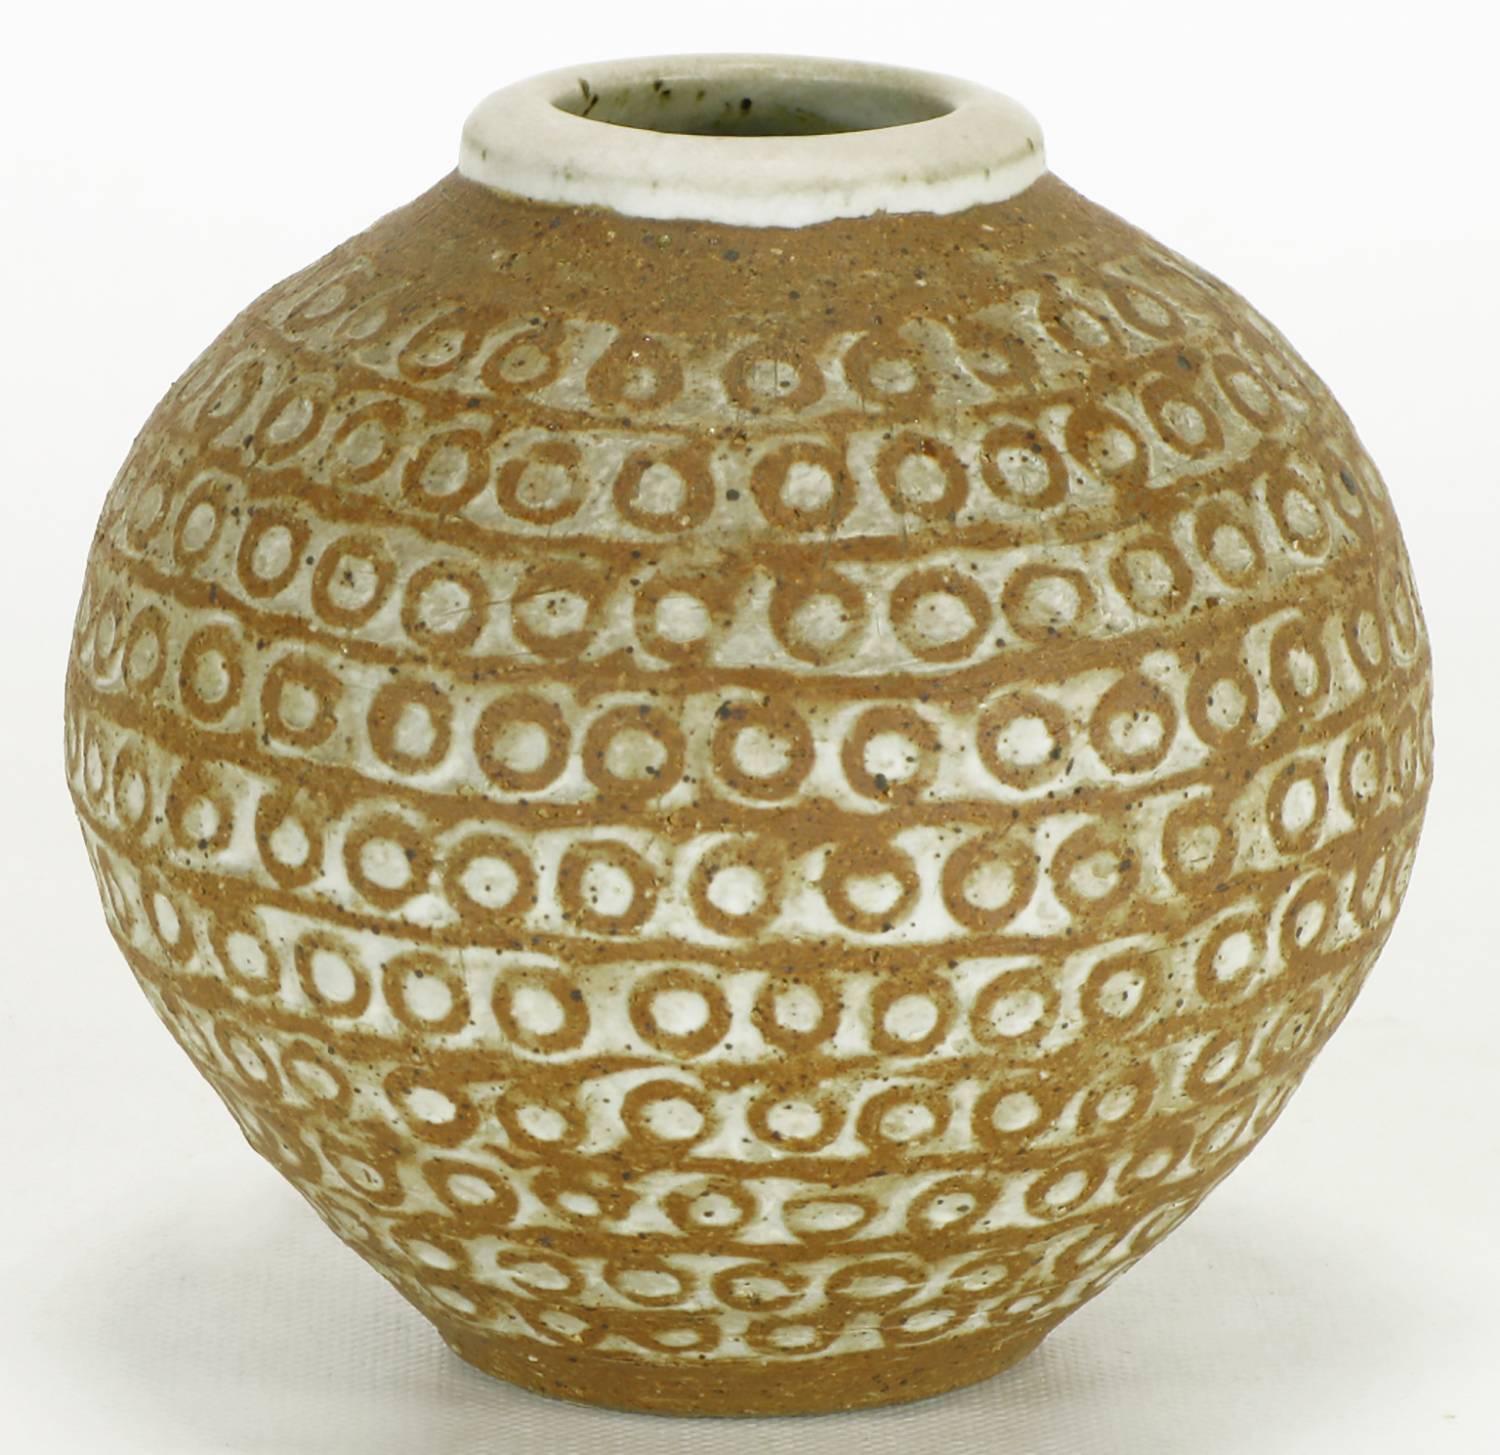 American Relief Patterned Earthen Pottery Vase by Tomiya Matsuda For Sale